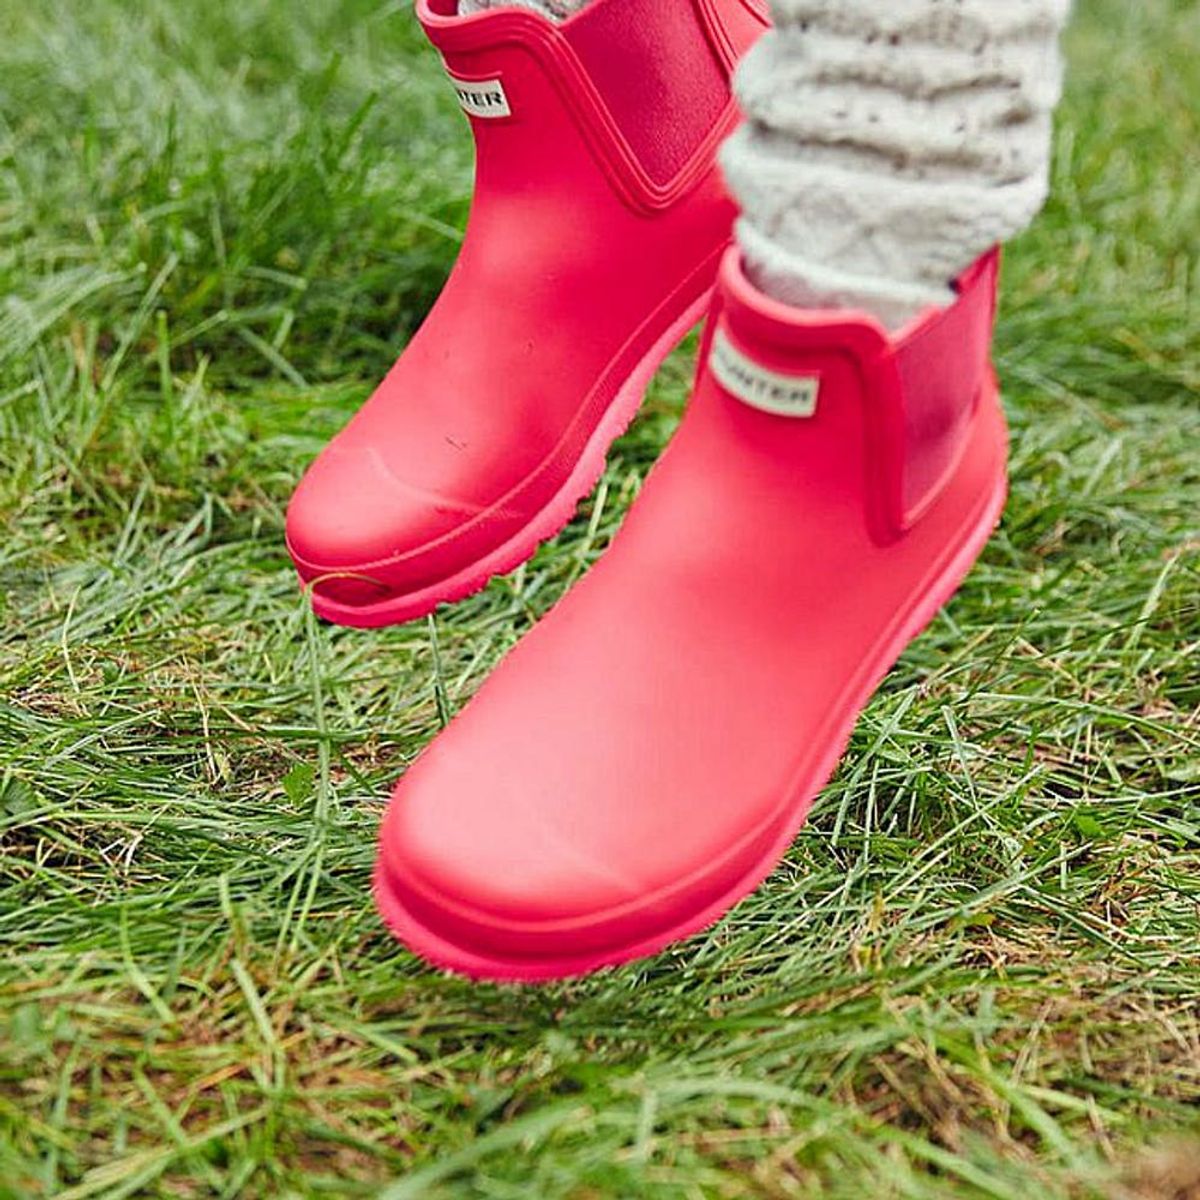 11 Rain Boots to Keep Your Feet Dry in Style